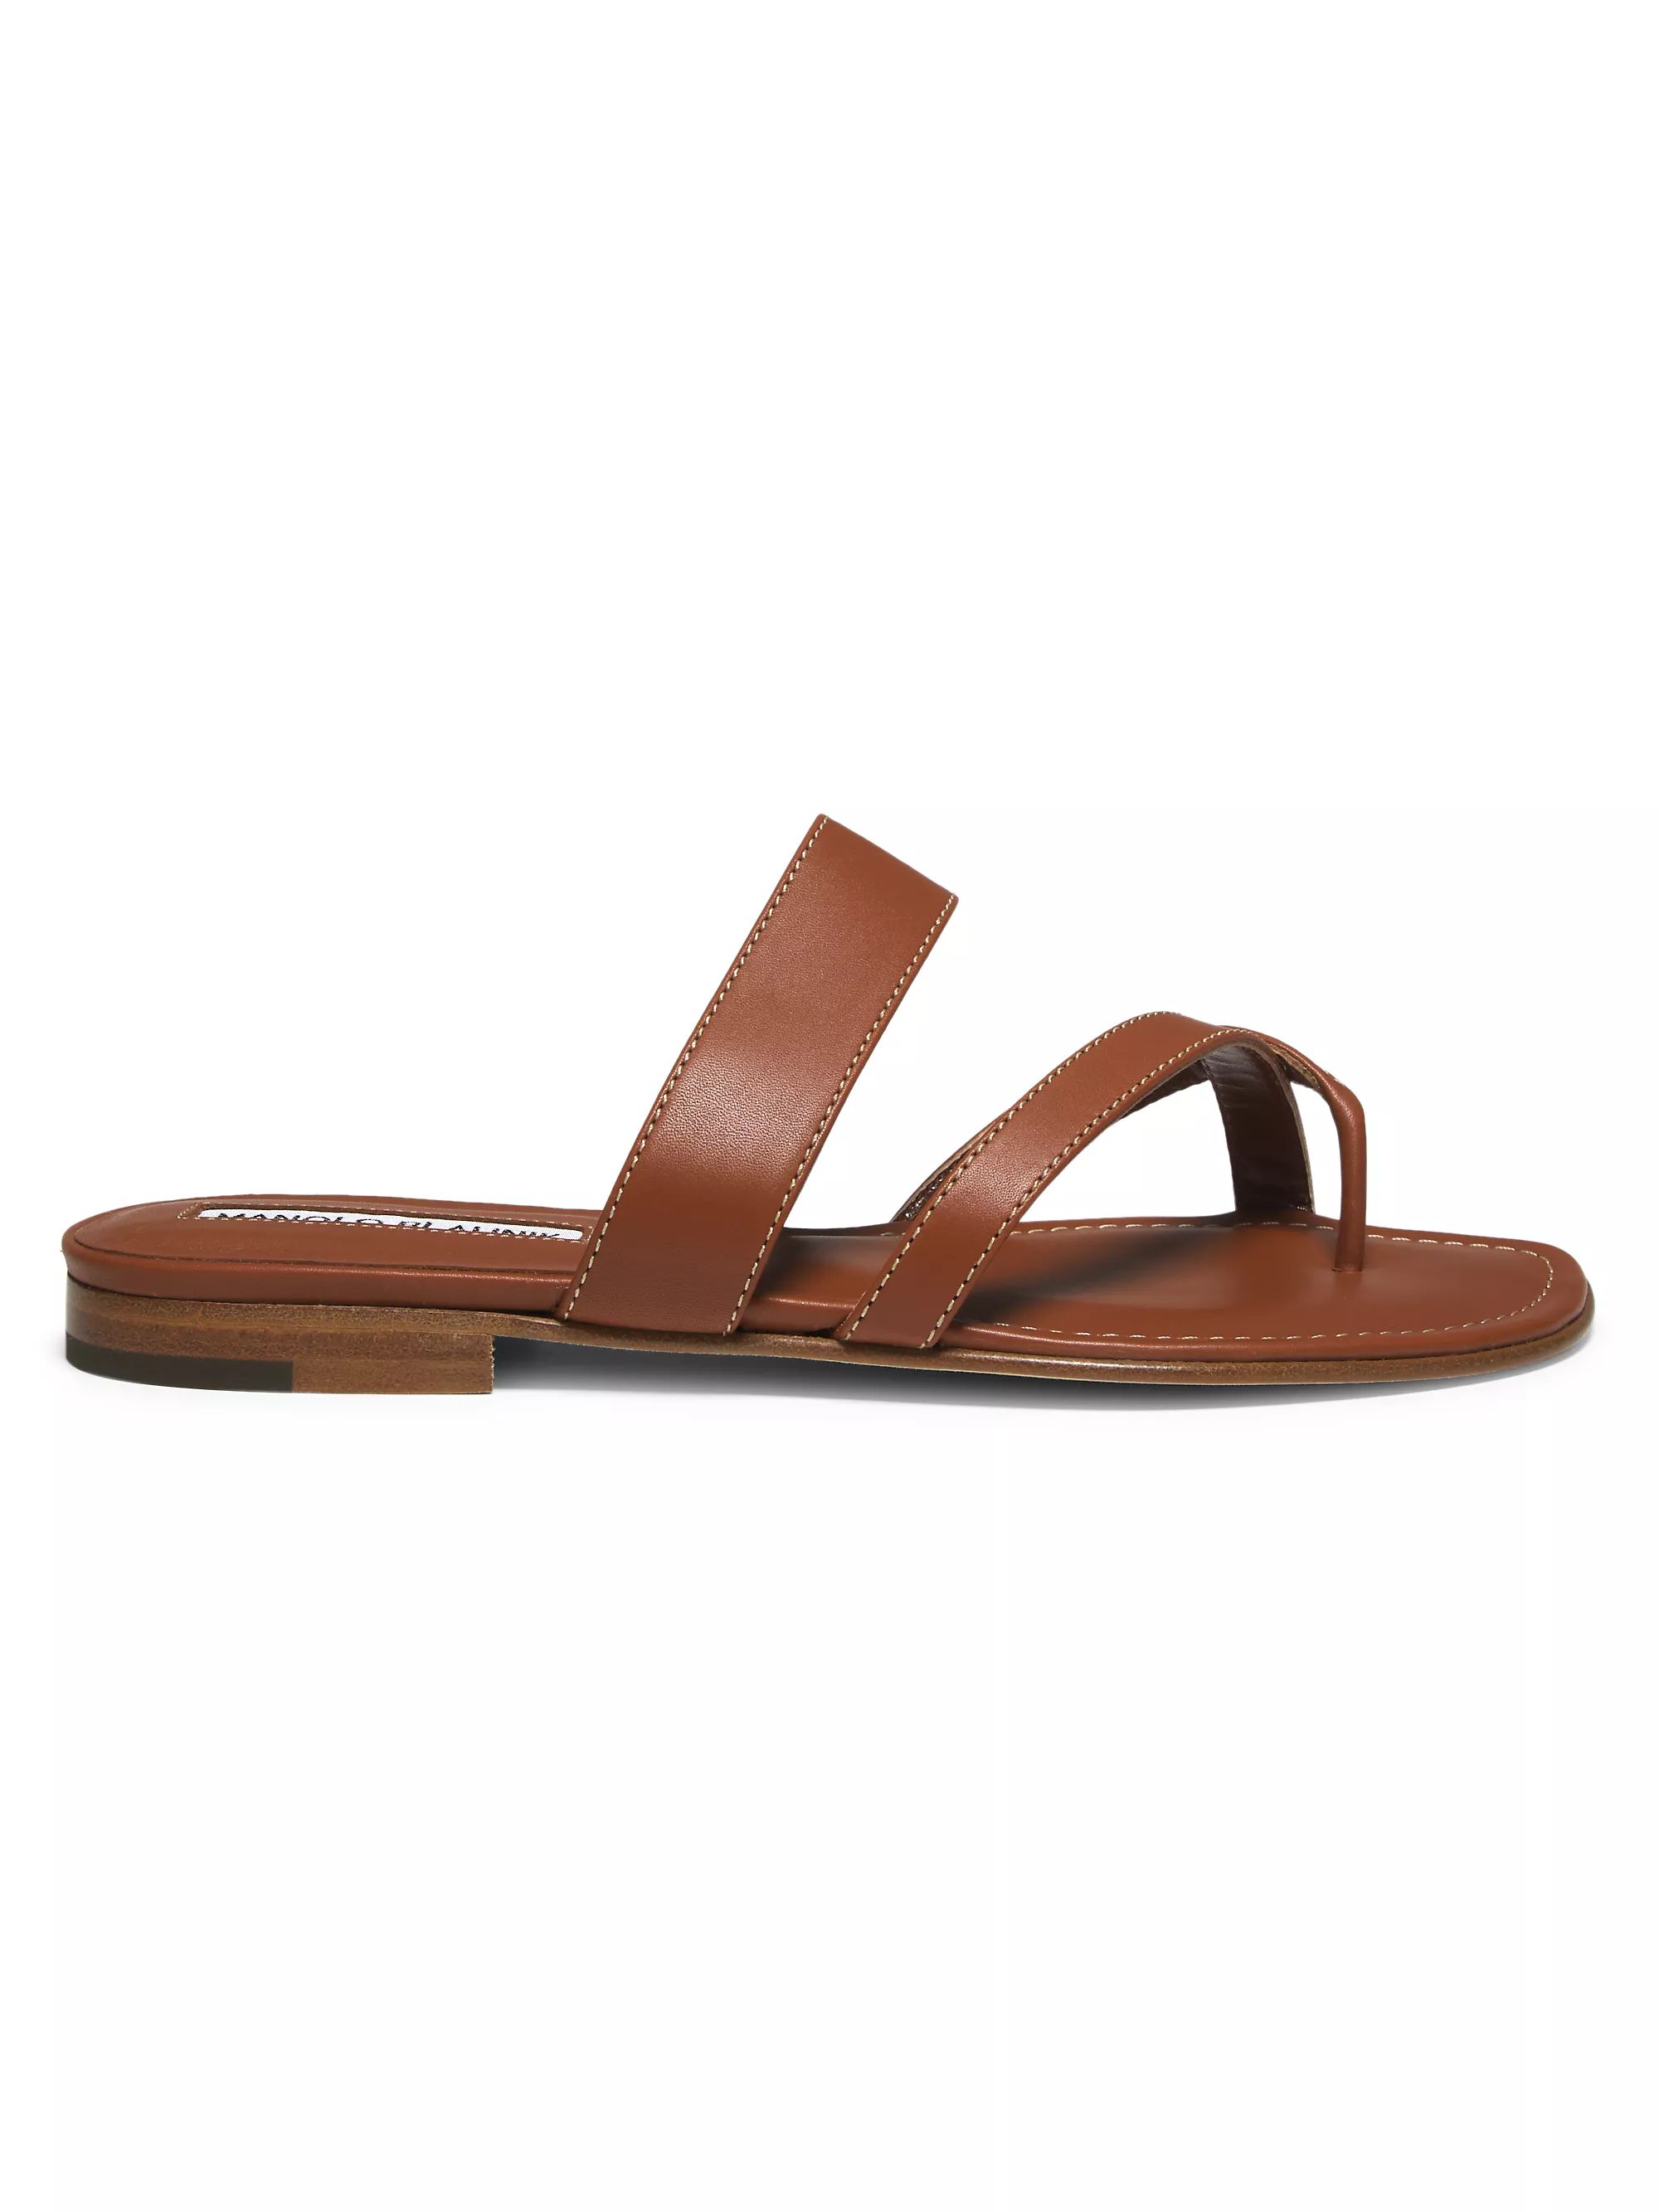 Susa Leather Thong Sandals | Saks Fifth Avenue